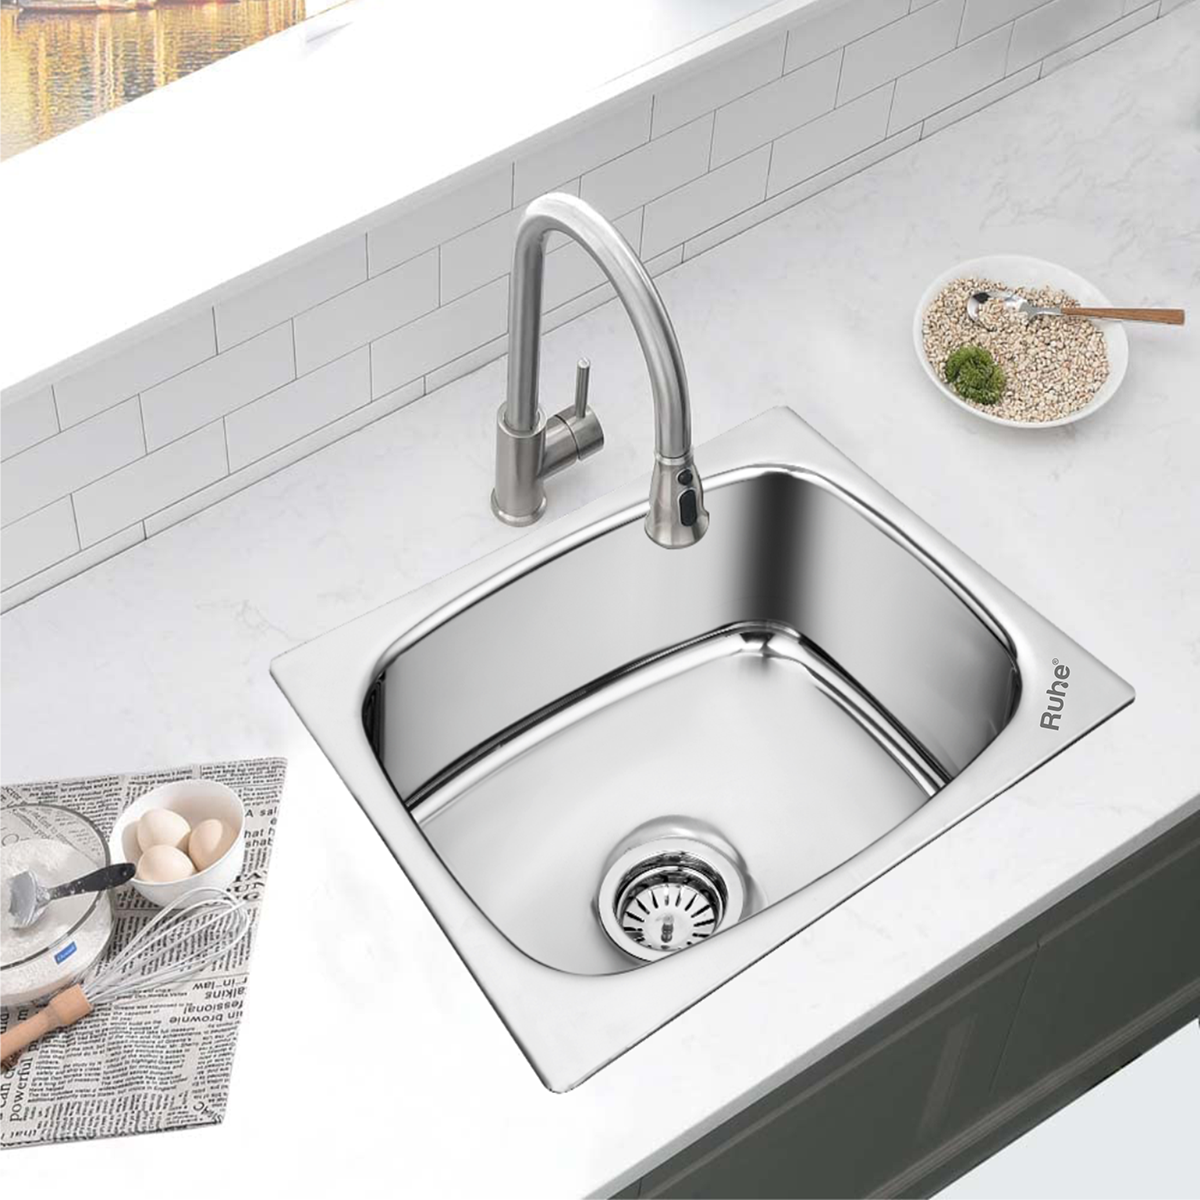 Oval Single Bowl (21 x 18 x 8 inches) Kitchen Sink installed